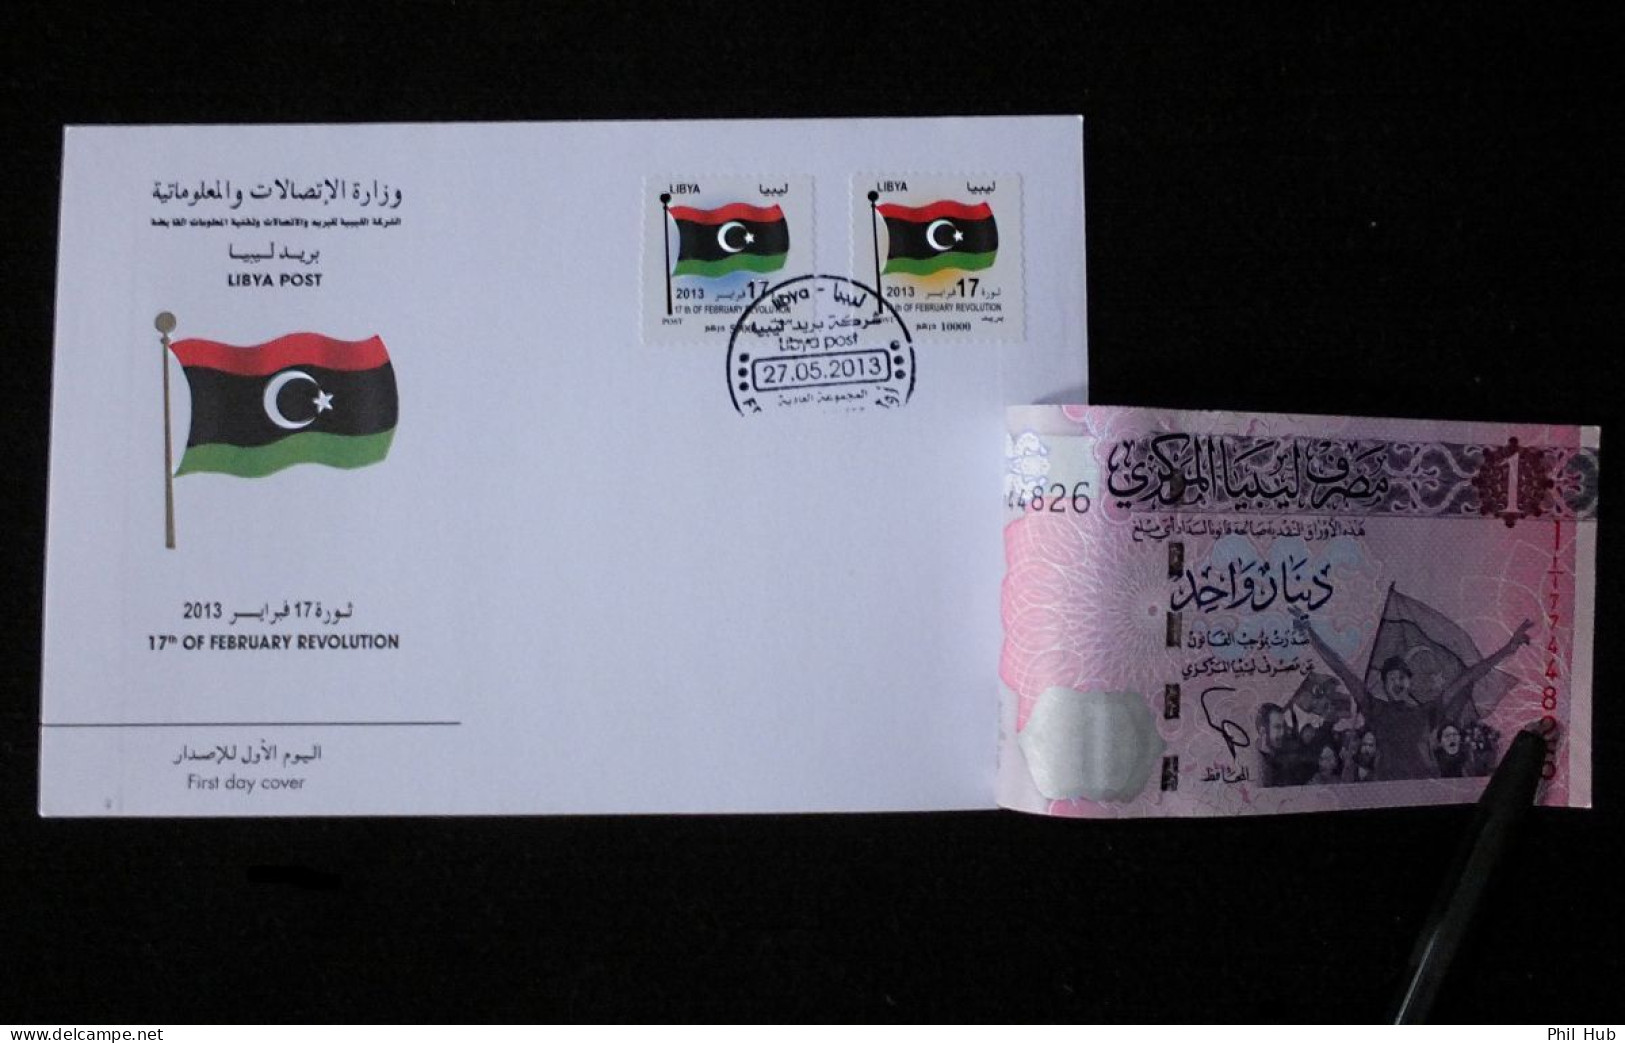 LIBYA 2013 "The Revolution FDC" NEW LIBYA FLAG STAMPS And BANKNOTE On FDC - Libia